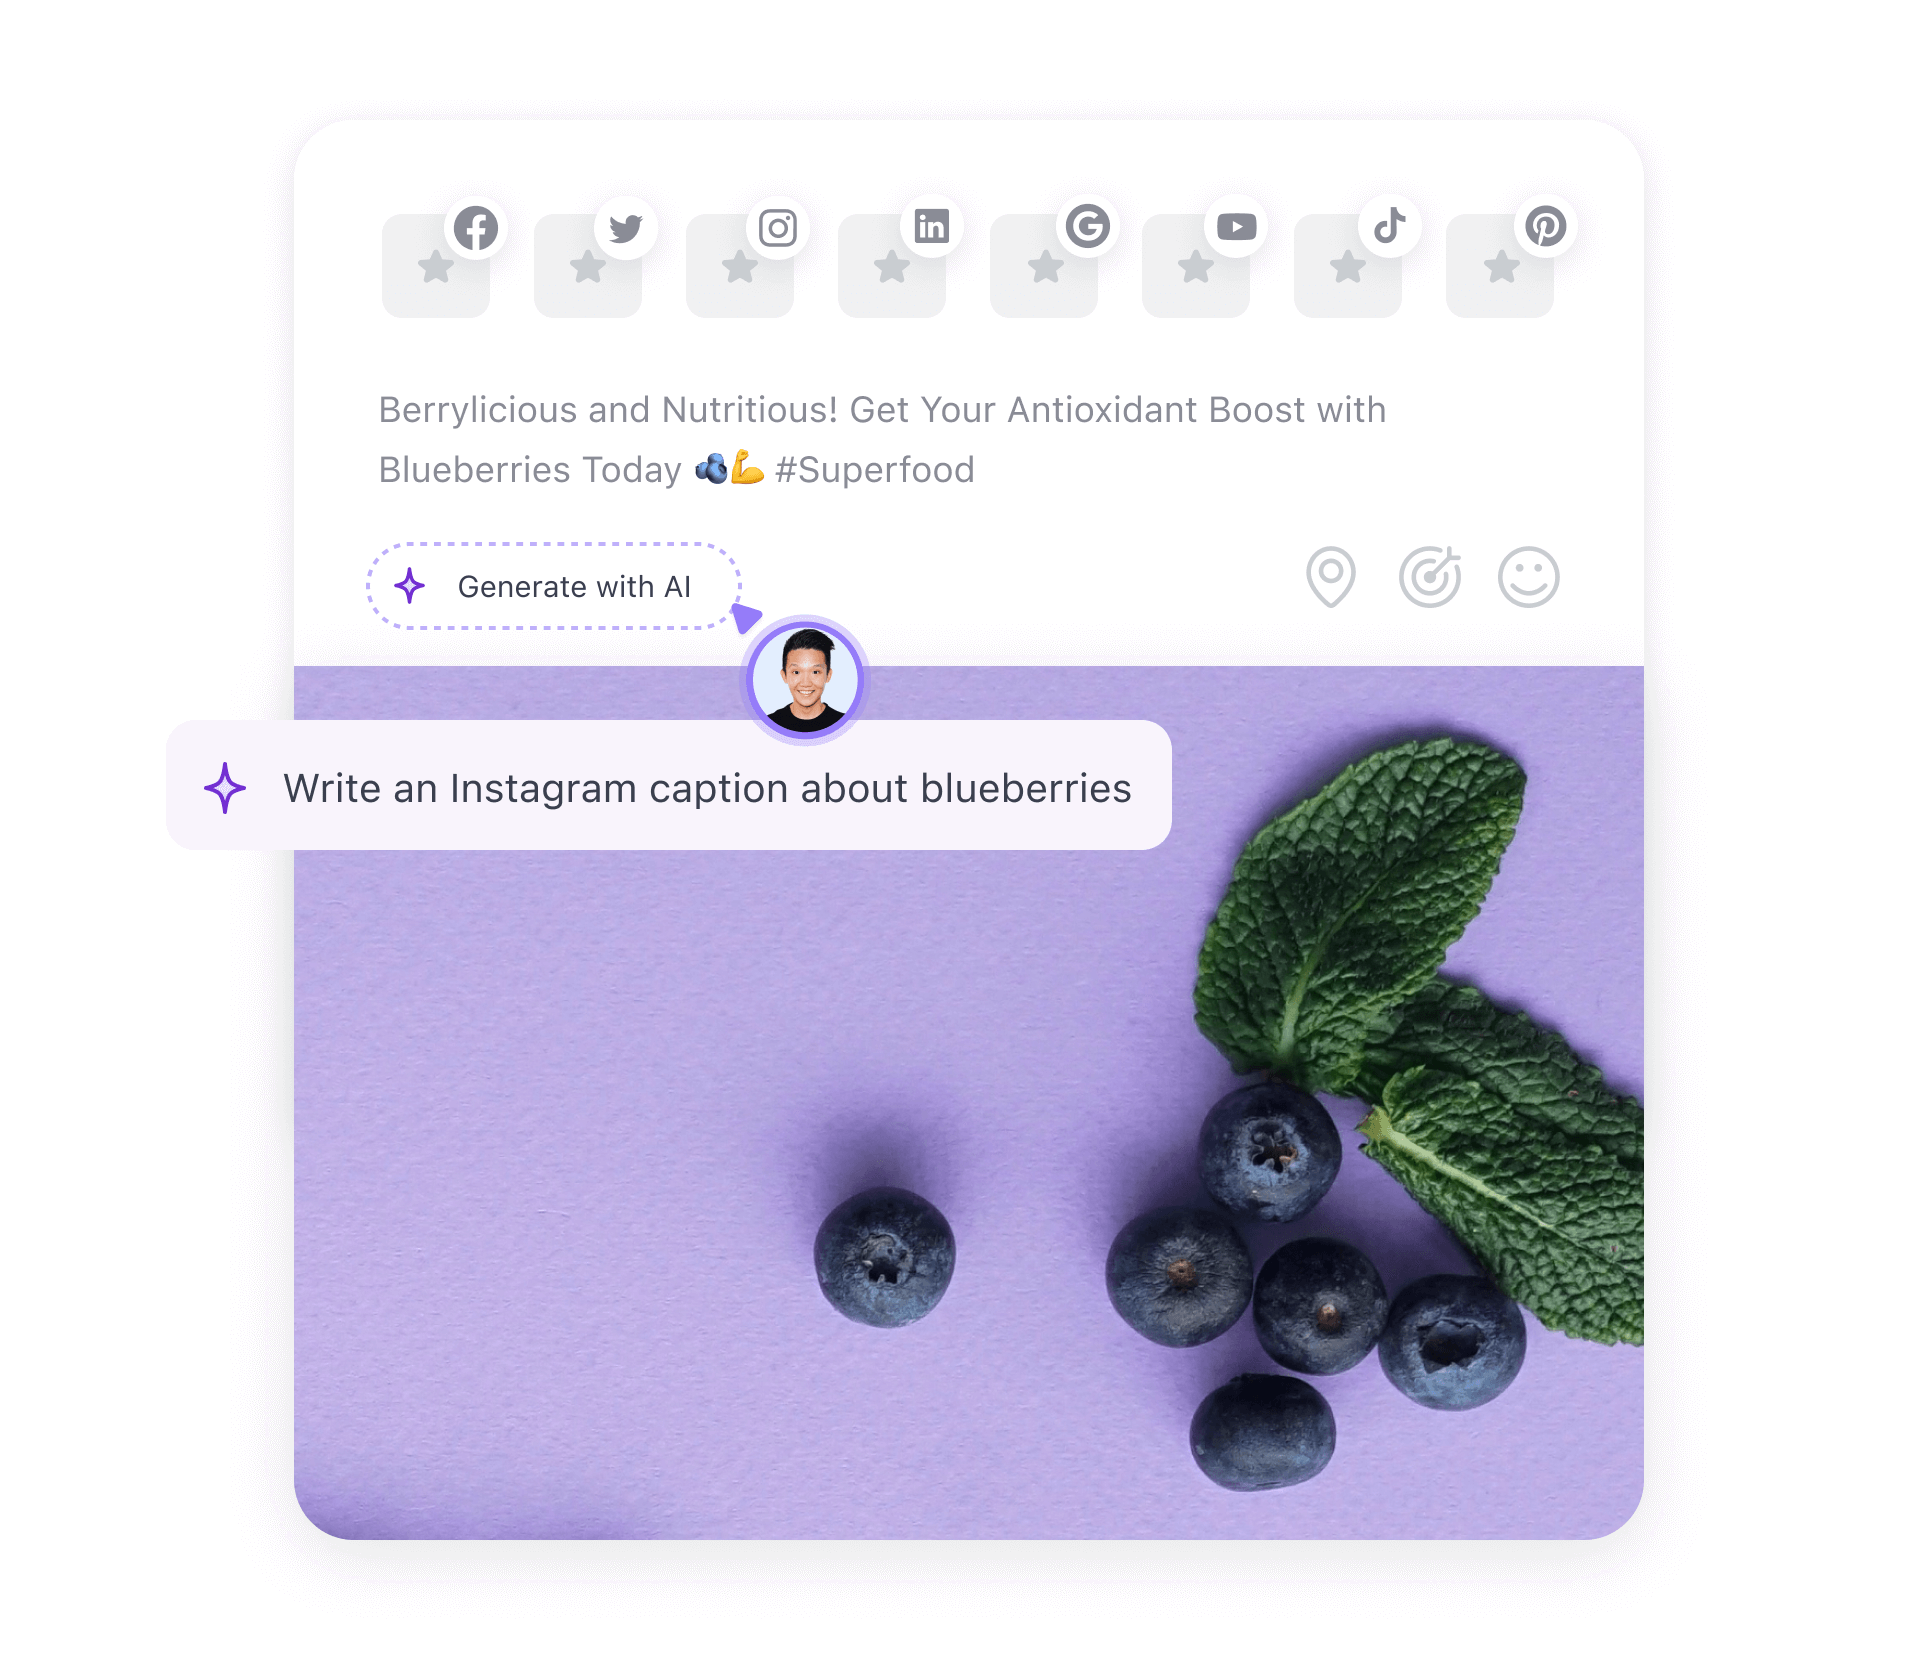 Writing an Instagram caption about blueberries using AI, with a prompt and image of blueberries and mint leaves on a purple background.